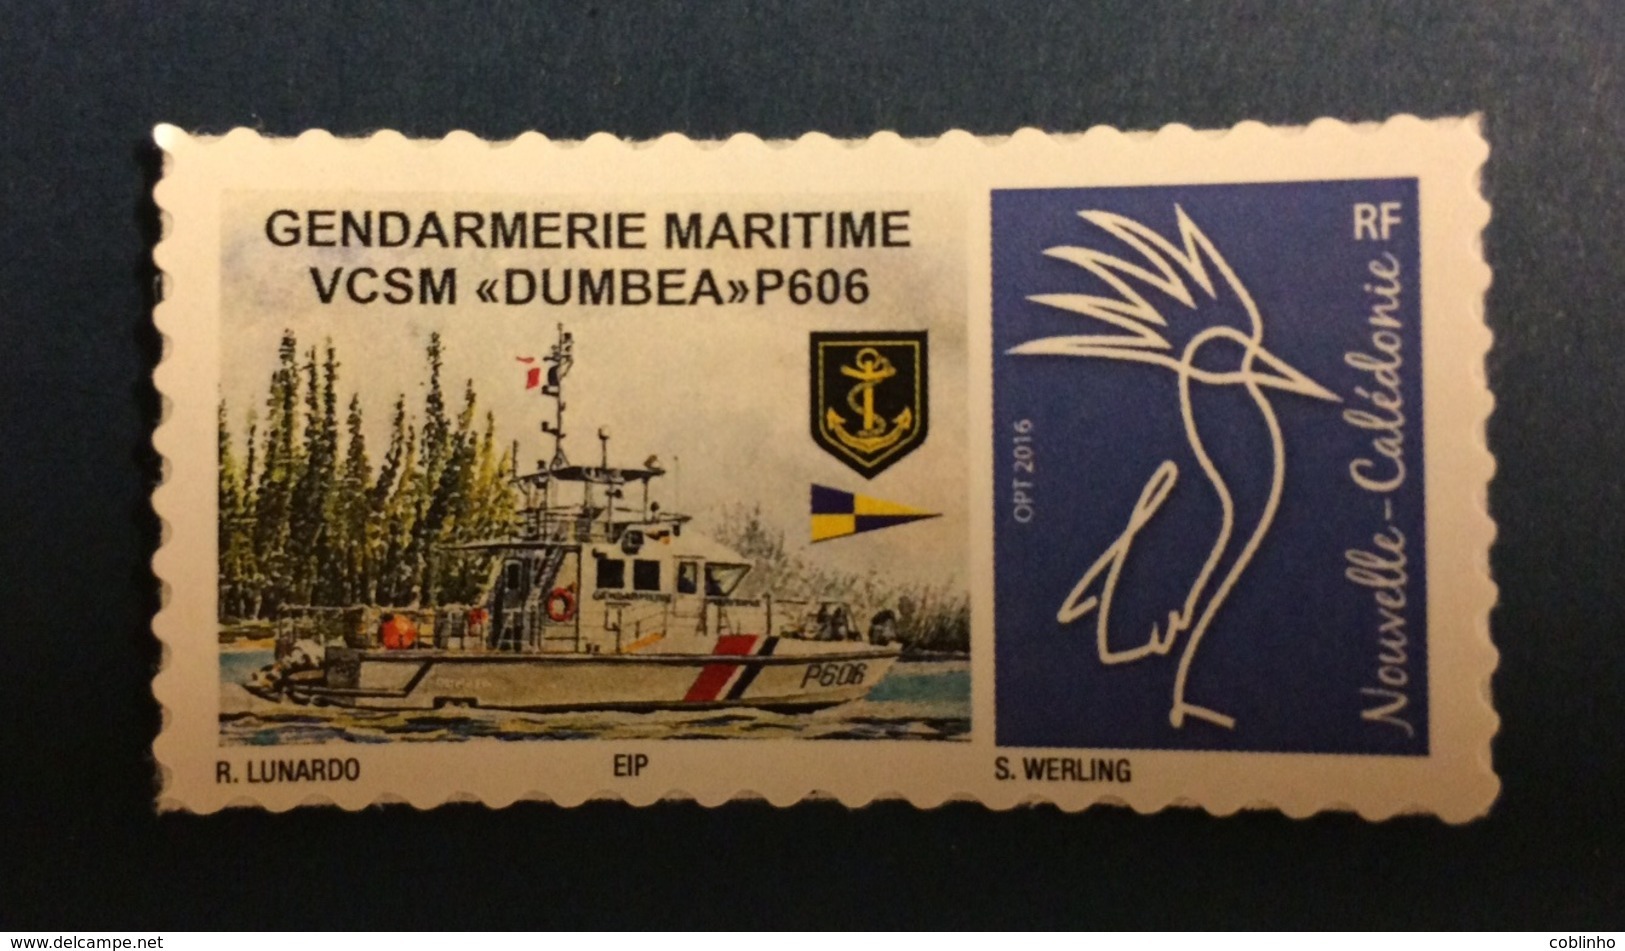 NOUVELLE CALEDONIE (New Caledonia)- Timbre Personnalisé - 2018 - Vedette Dumbéa - Unused Stamps